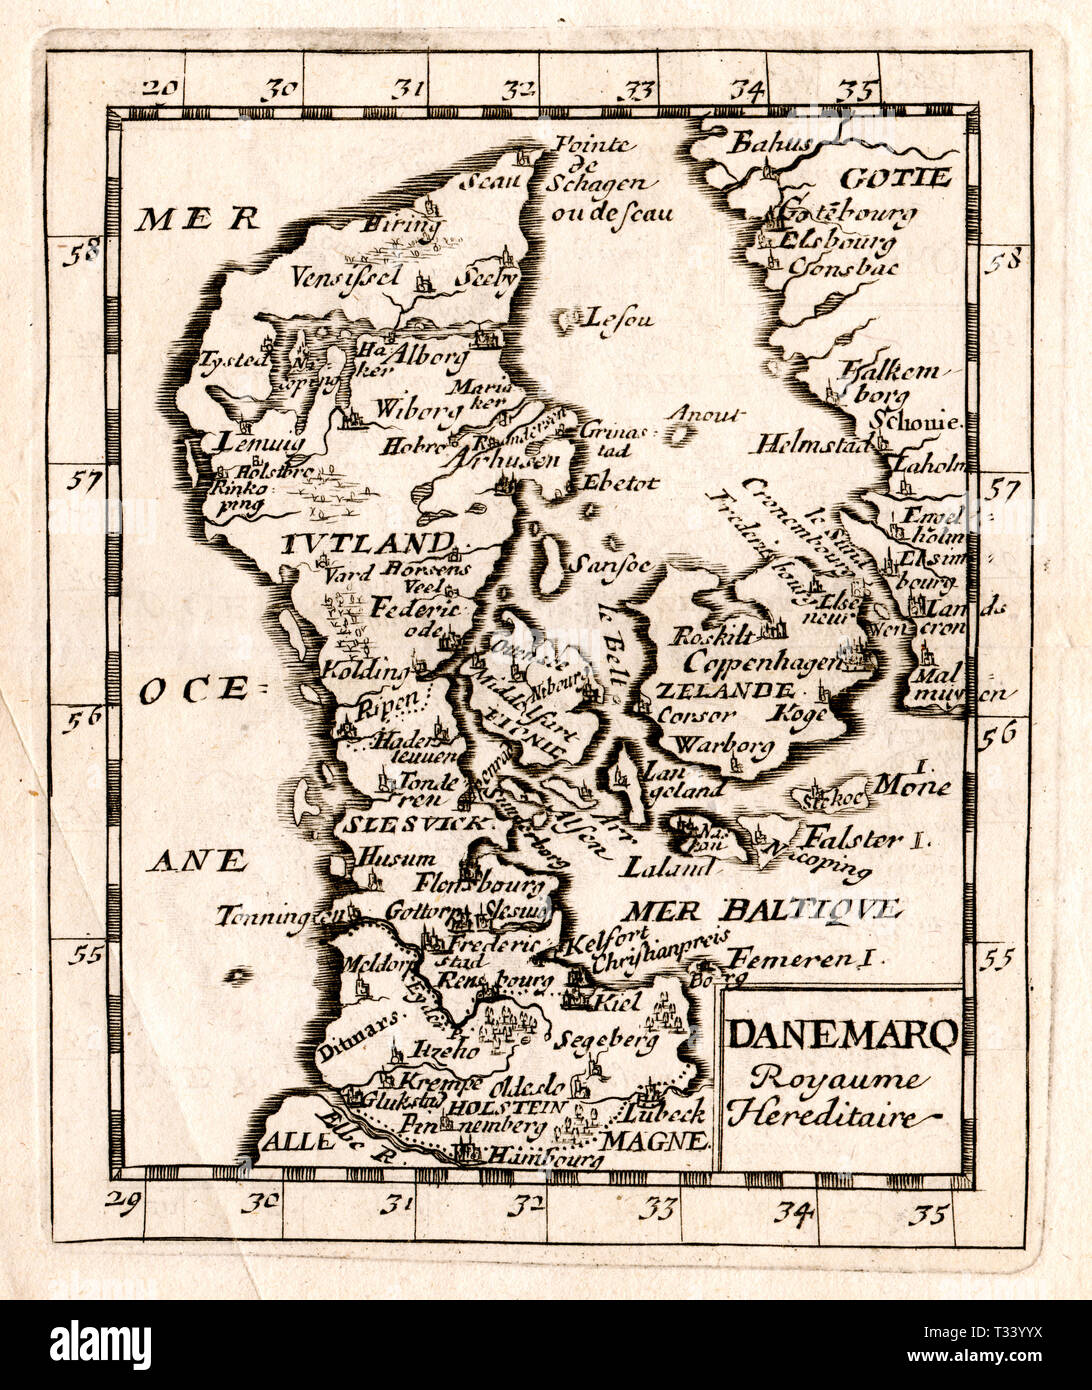 Antique Map of Denmark by Pierre Duval, published in Paris, 1682 Stock Photo